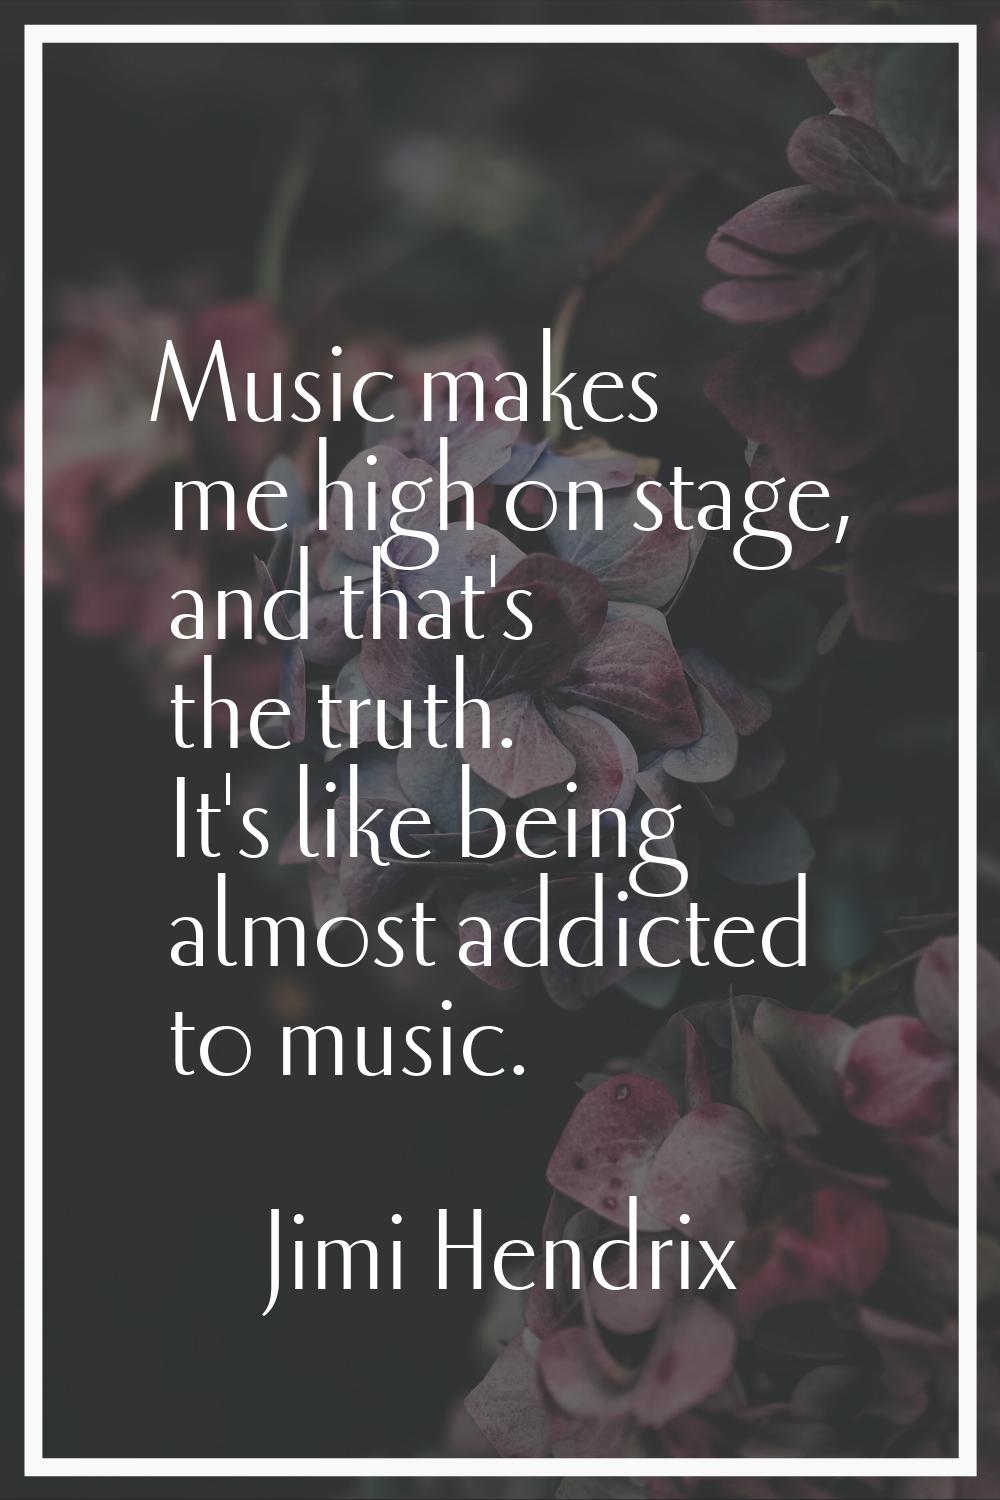 Music makes me high on stage, and that's the truth. It's like being almost addicted to music.